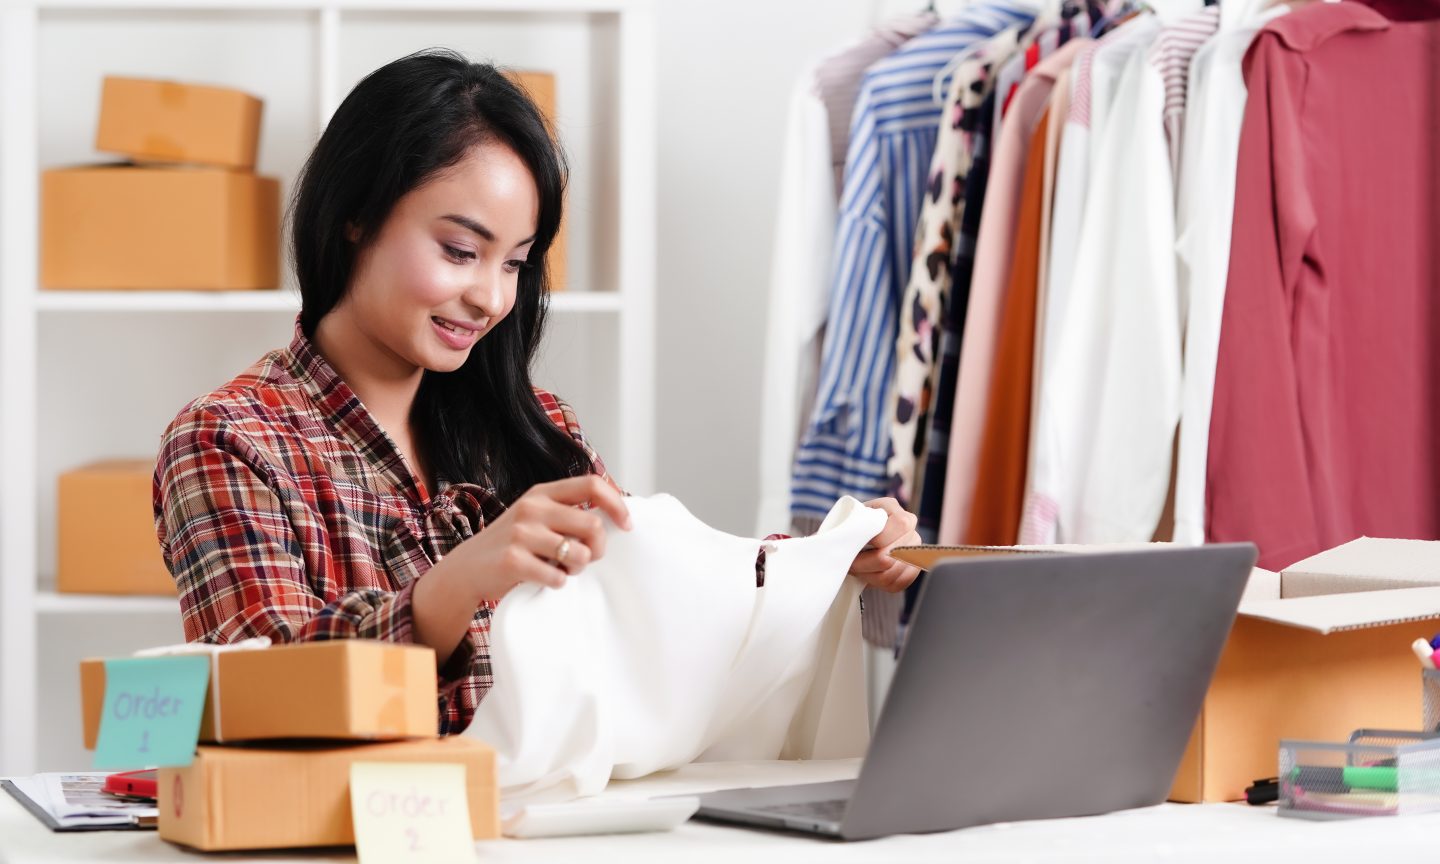 5 Best Sites to Sell Clothes Online and How to Do It - NerdWallet